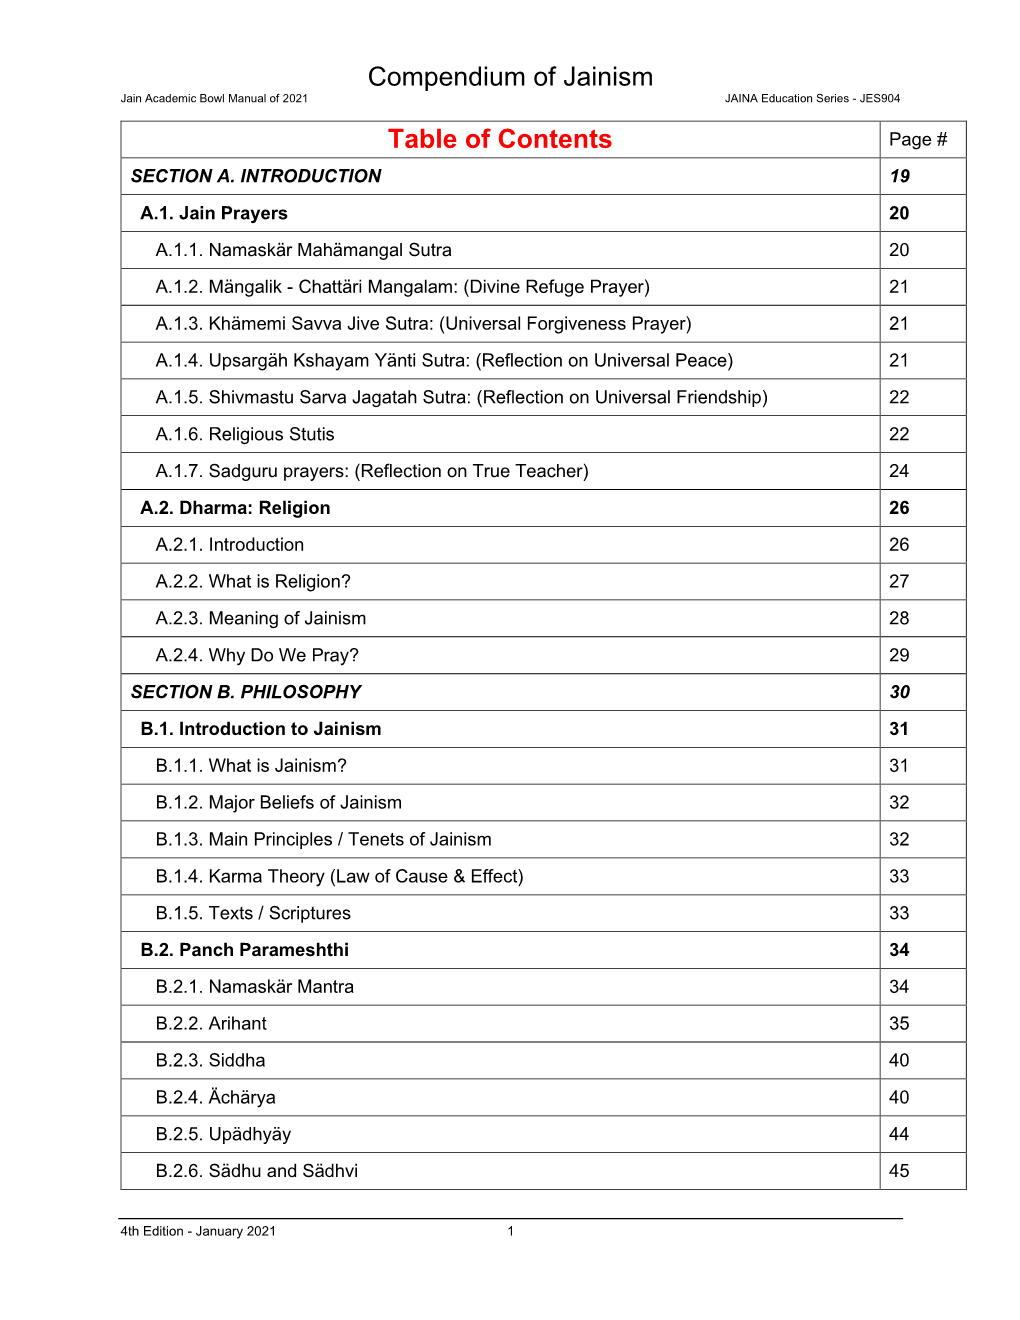 JAB 2021 Table of Contents